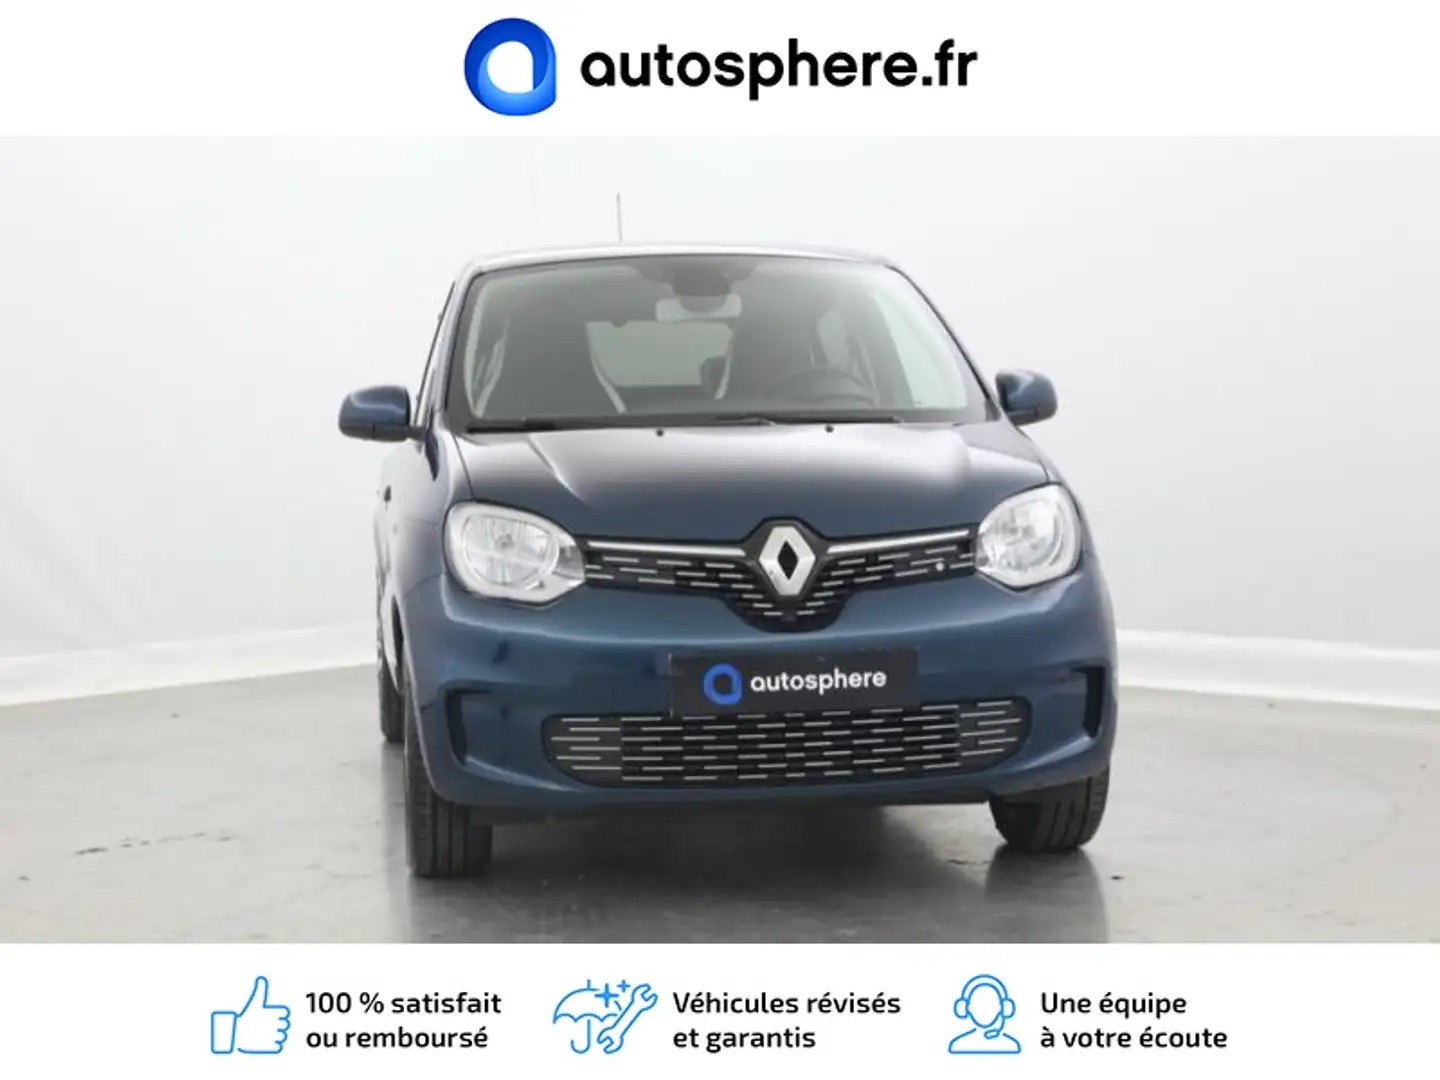 Renault Twingo 0.9 TCe 95ch Signature - 2